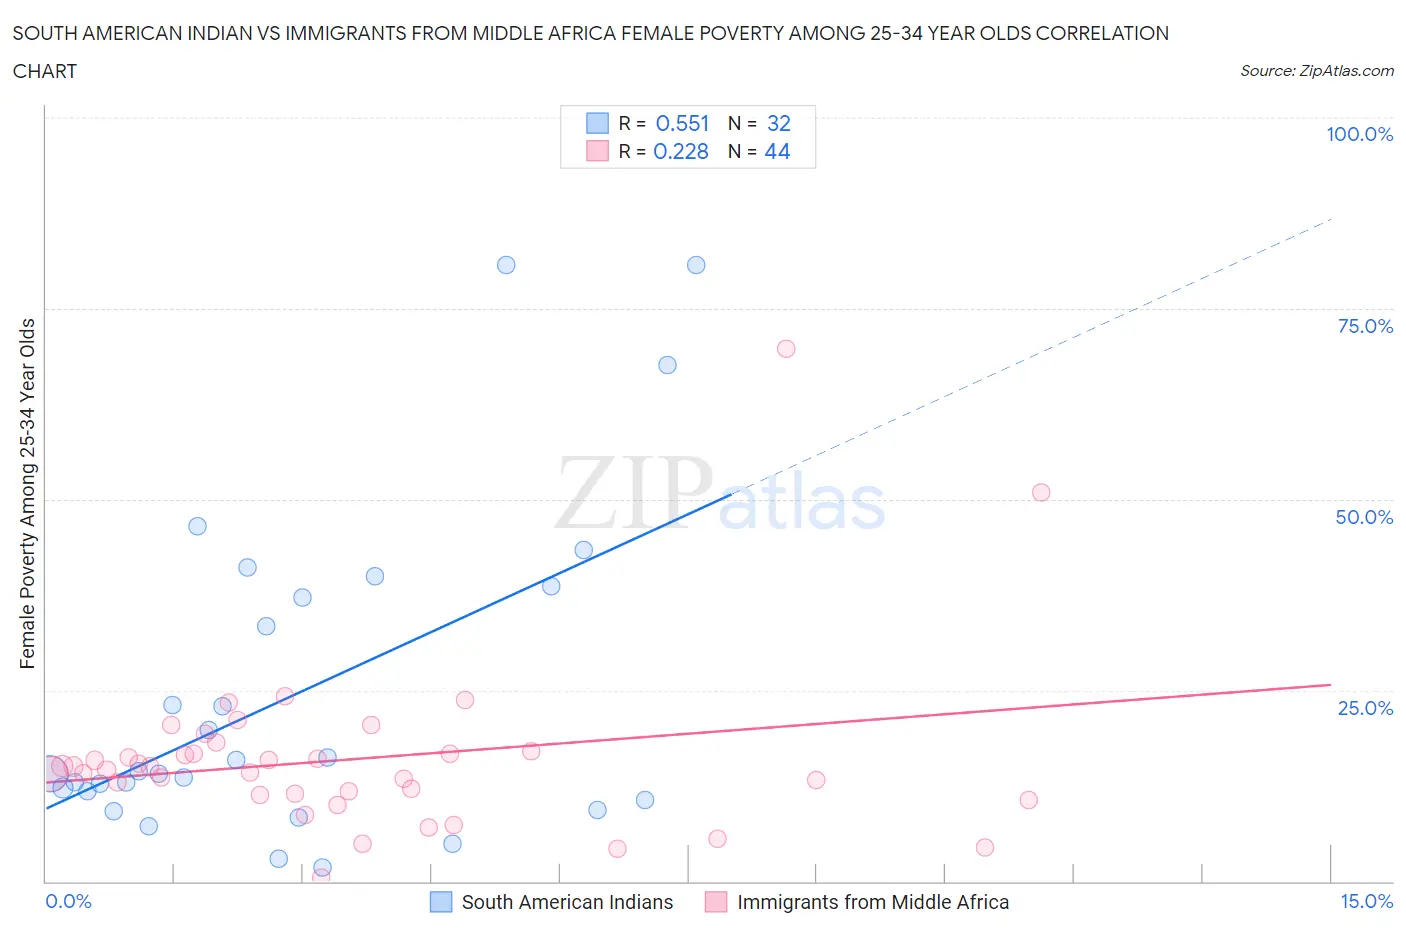 South American Indian vs Immigrants from Middle Africa Female Poverty Among 25-34 Year Olds